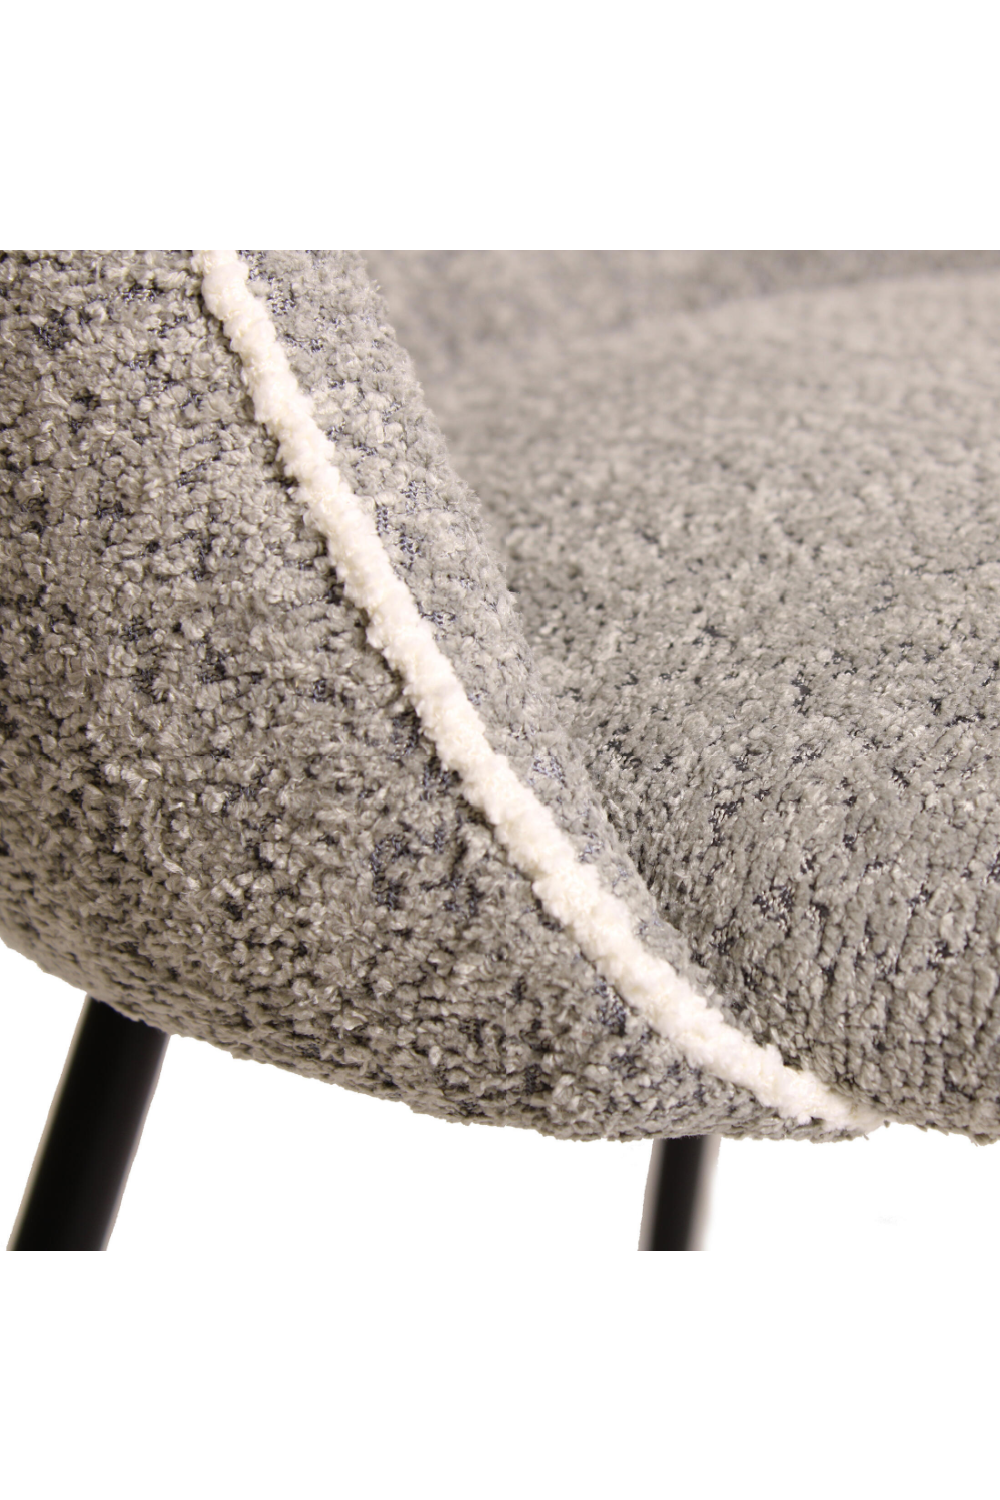 Gray Chenille Upholstered Dining Chair | Andrew Martin Colina | Oroa.com